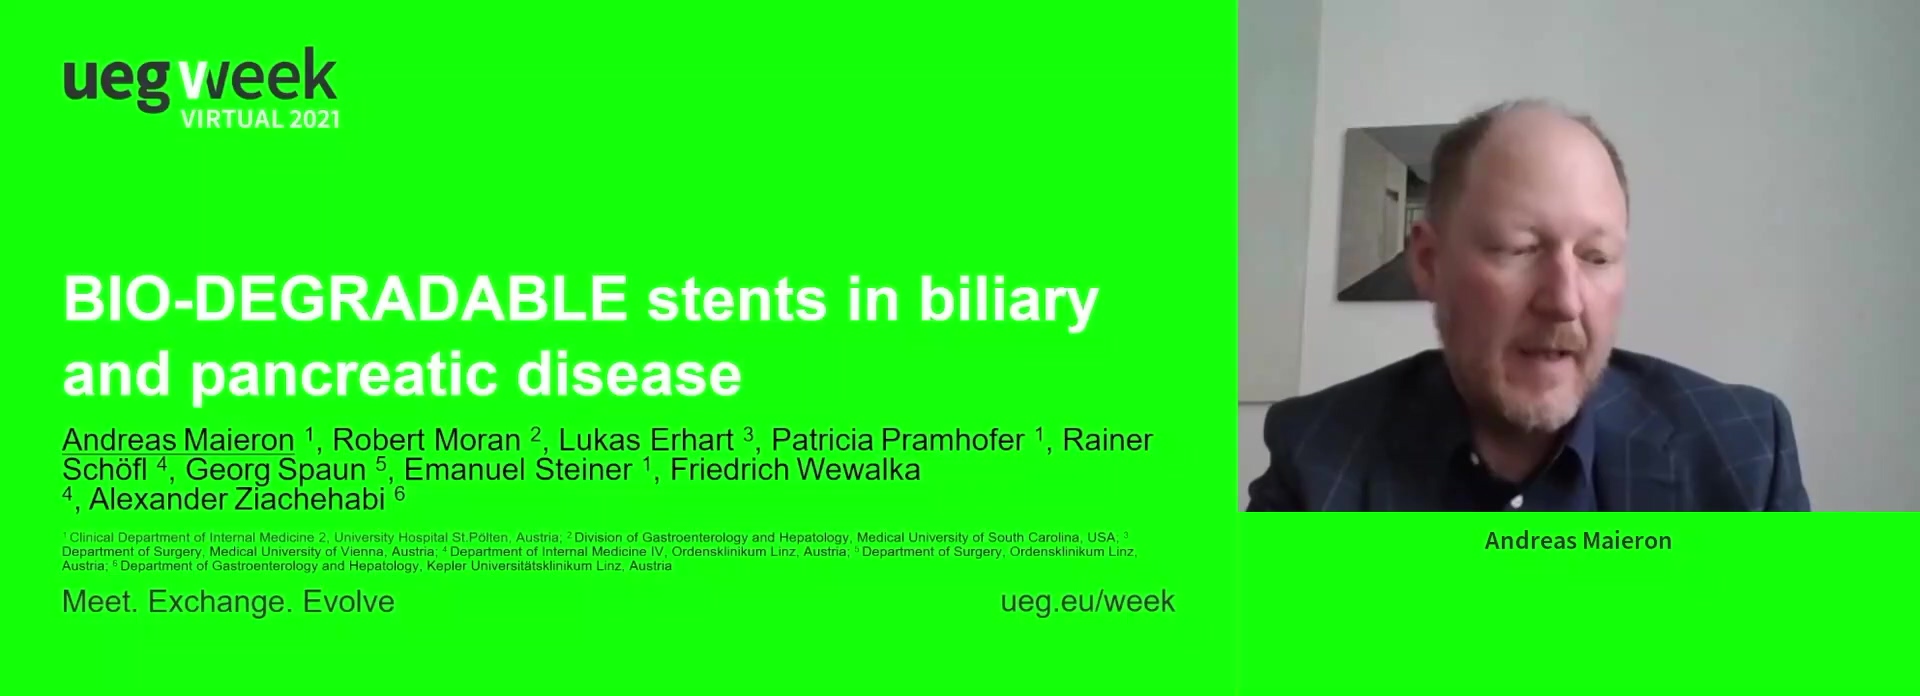 BIO-DEGRADABLE STENTS IN BILIARY AND PANCREATIC DISEASE